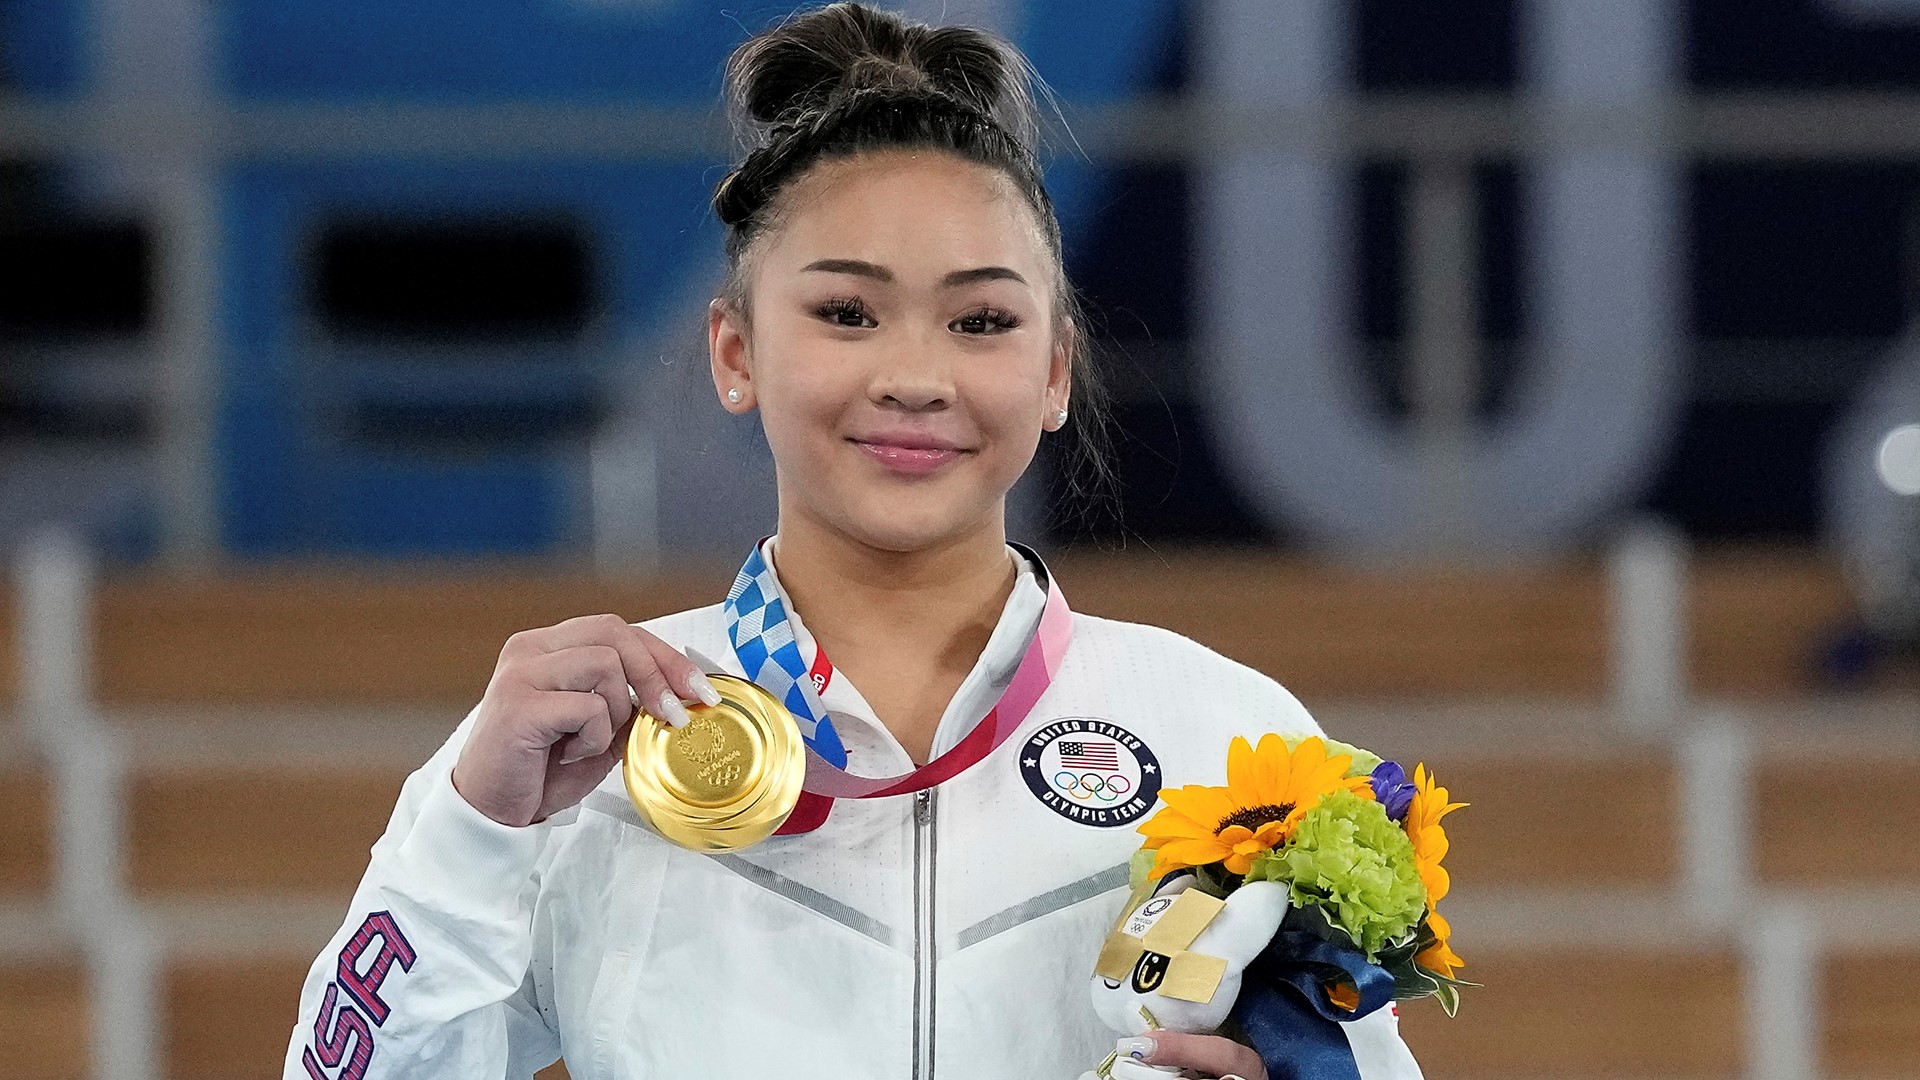 Suni Lee became the fifth American in a row to win the Olympic women's gymnastics all-around gold medal.